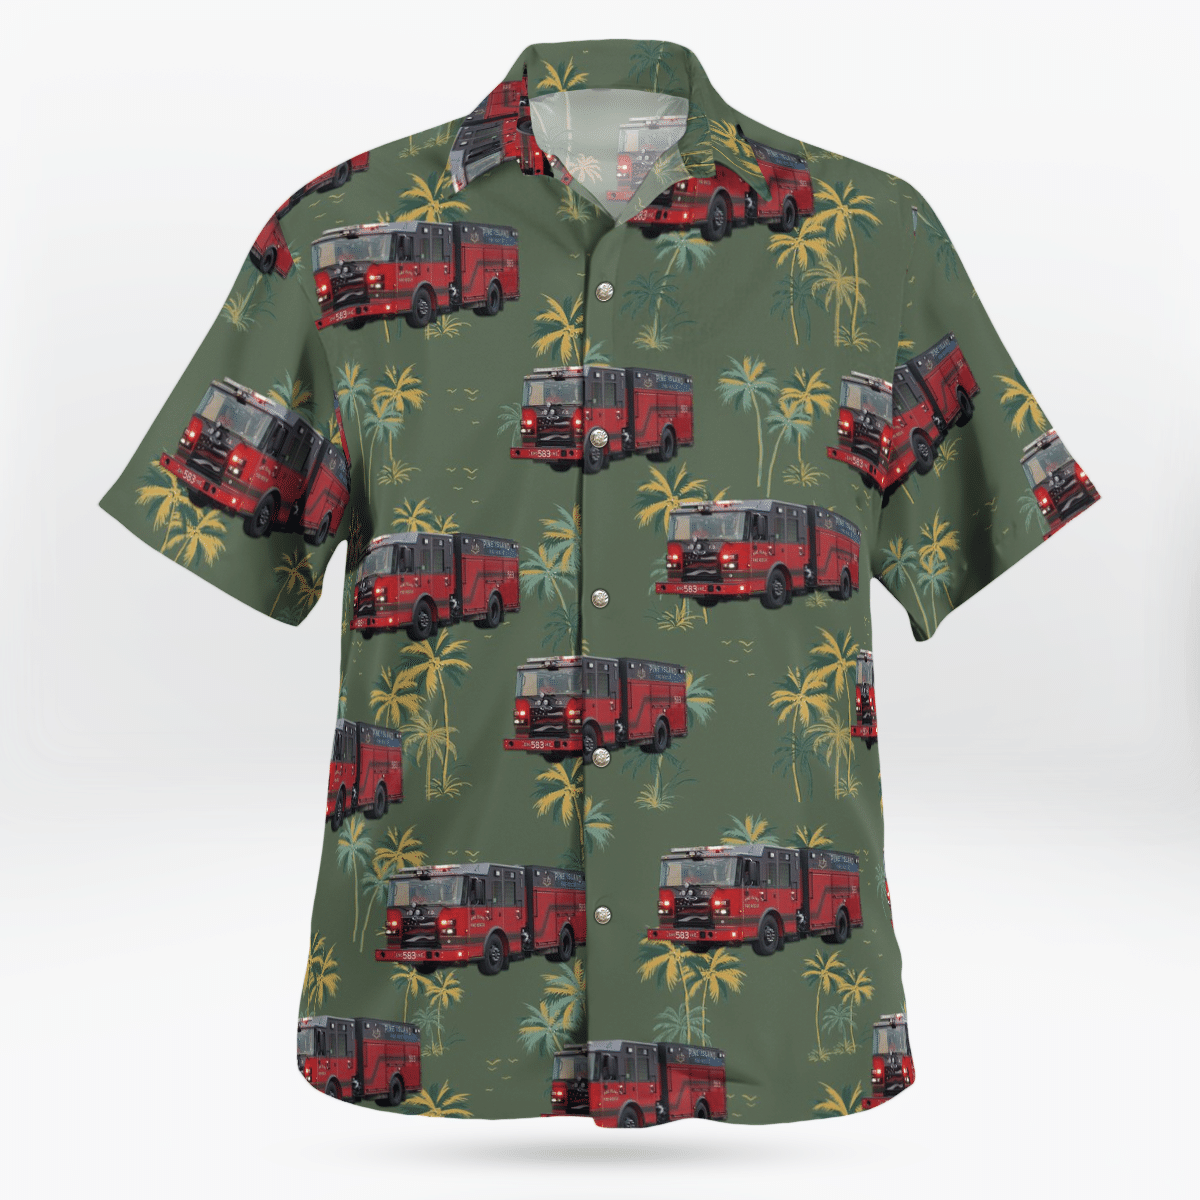 Hawaiian shirts never go out of style 45